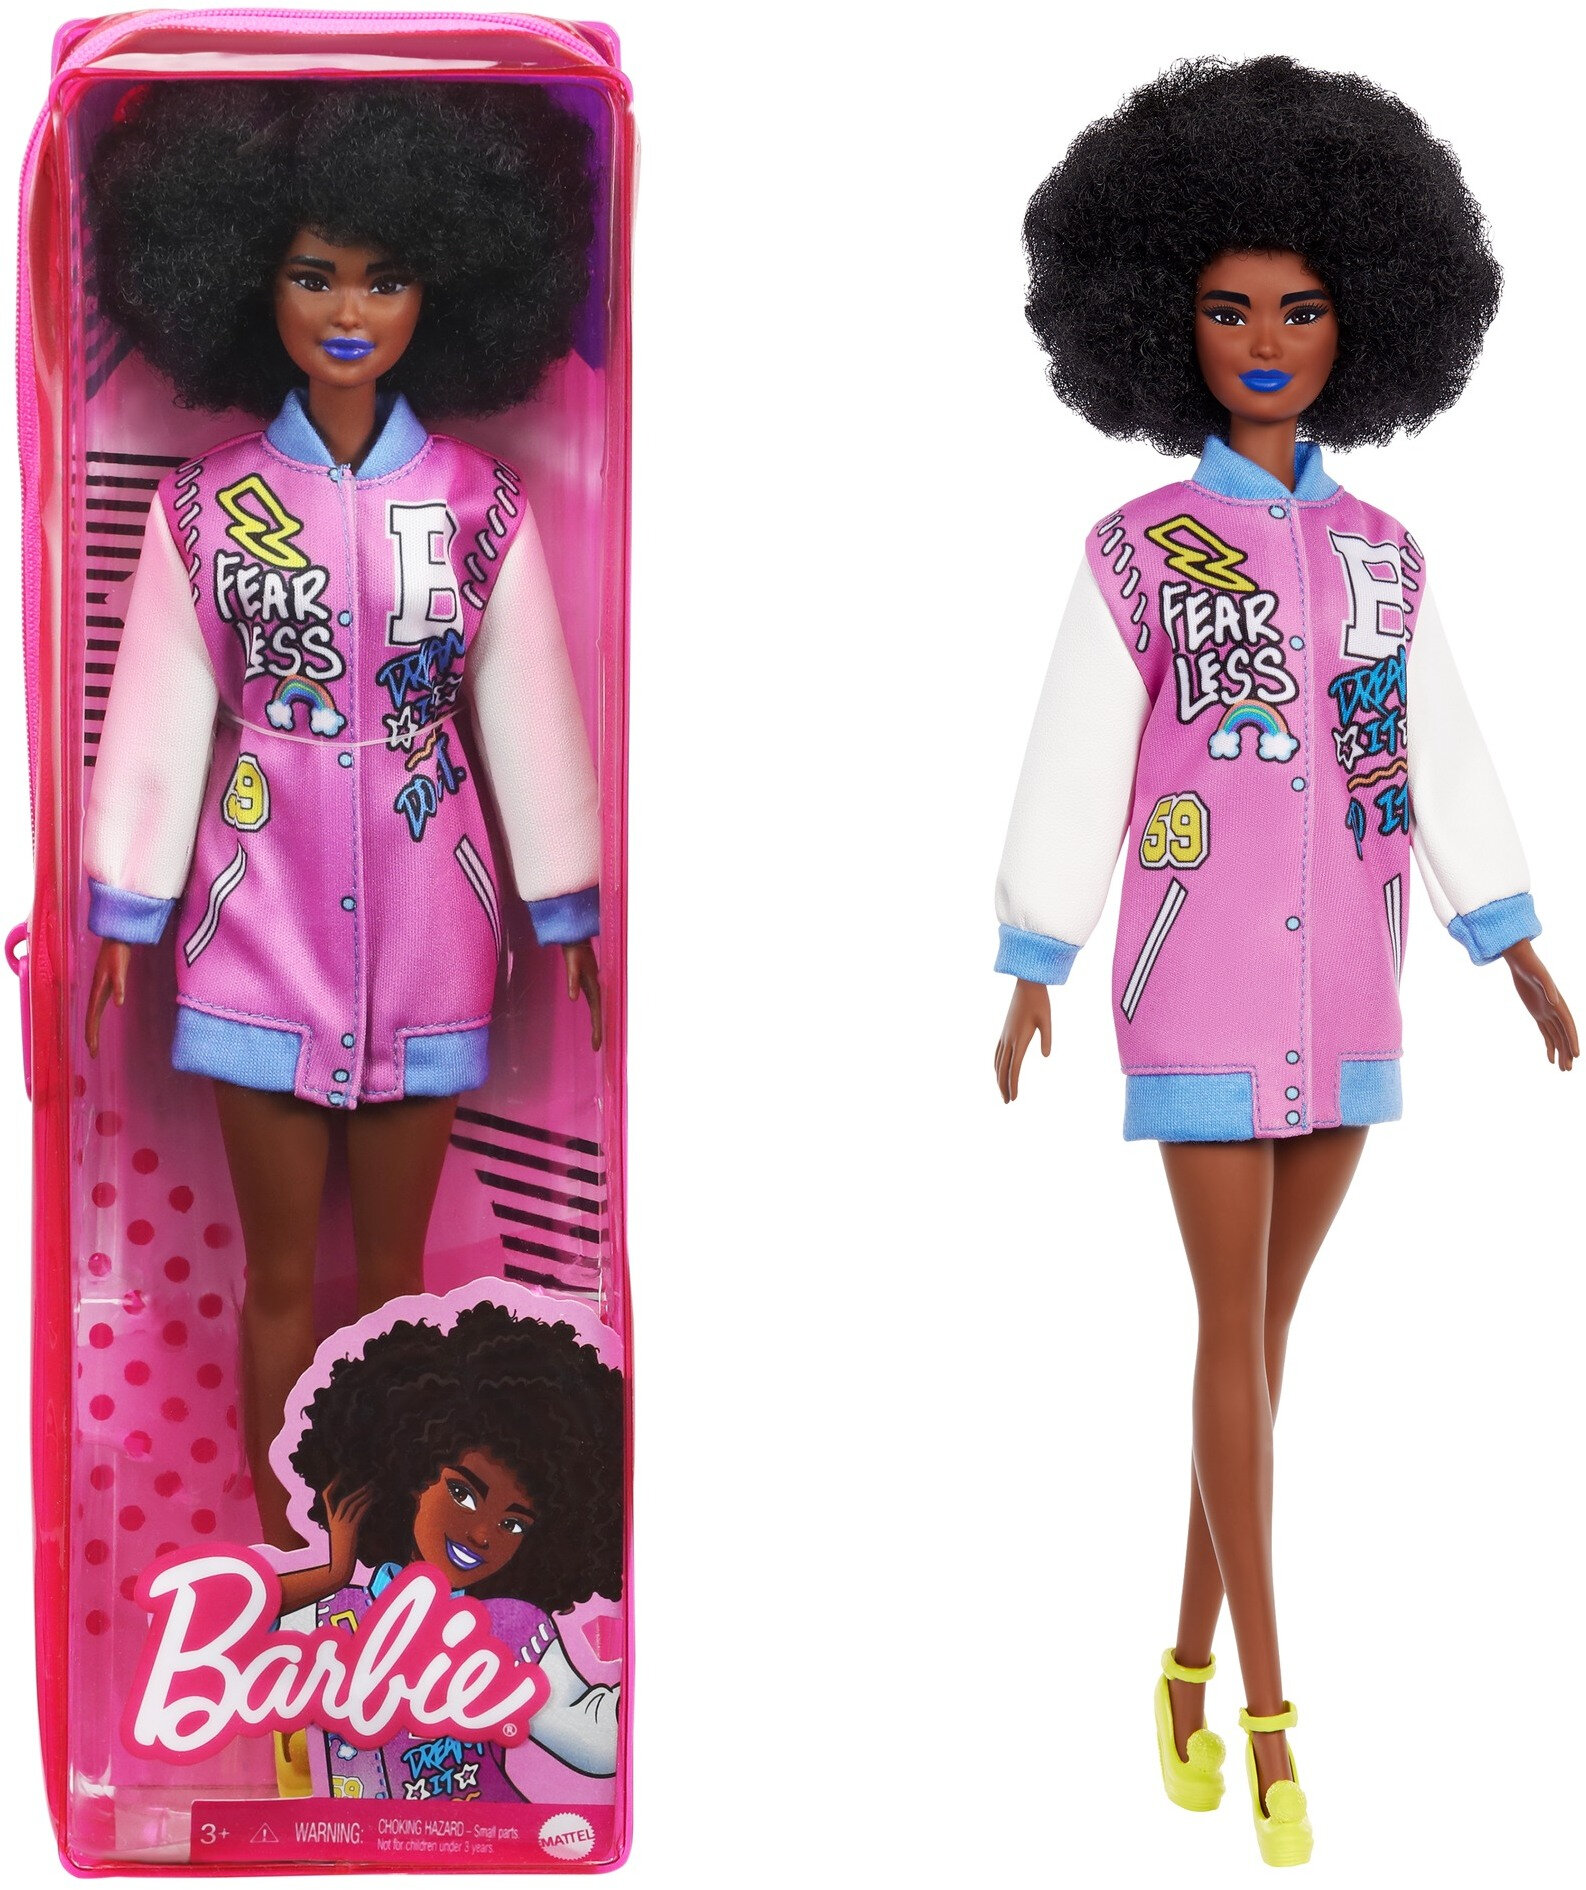 Barbie Fashionistas Doll #156 with Brunette Afro & Blue Lips Wearing Graphic Coat Dress - image 1 of 7